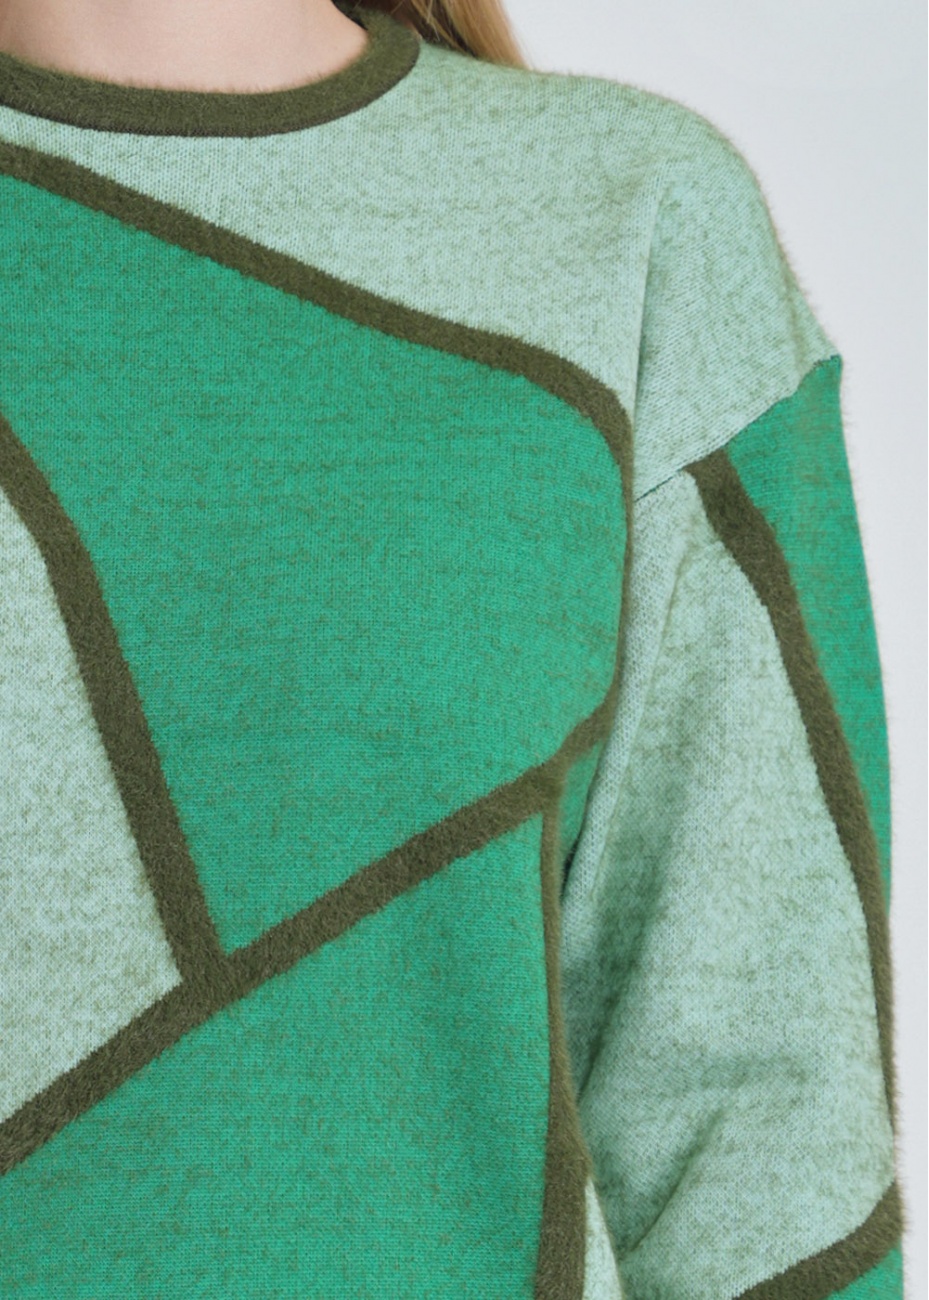 Mosaic of Greens: Color Block Sweater